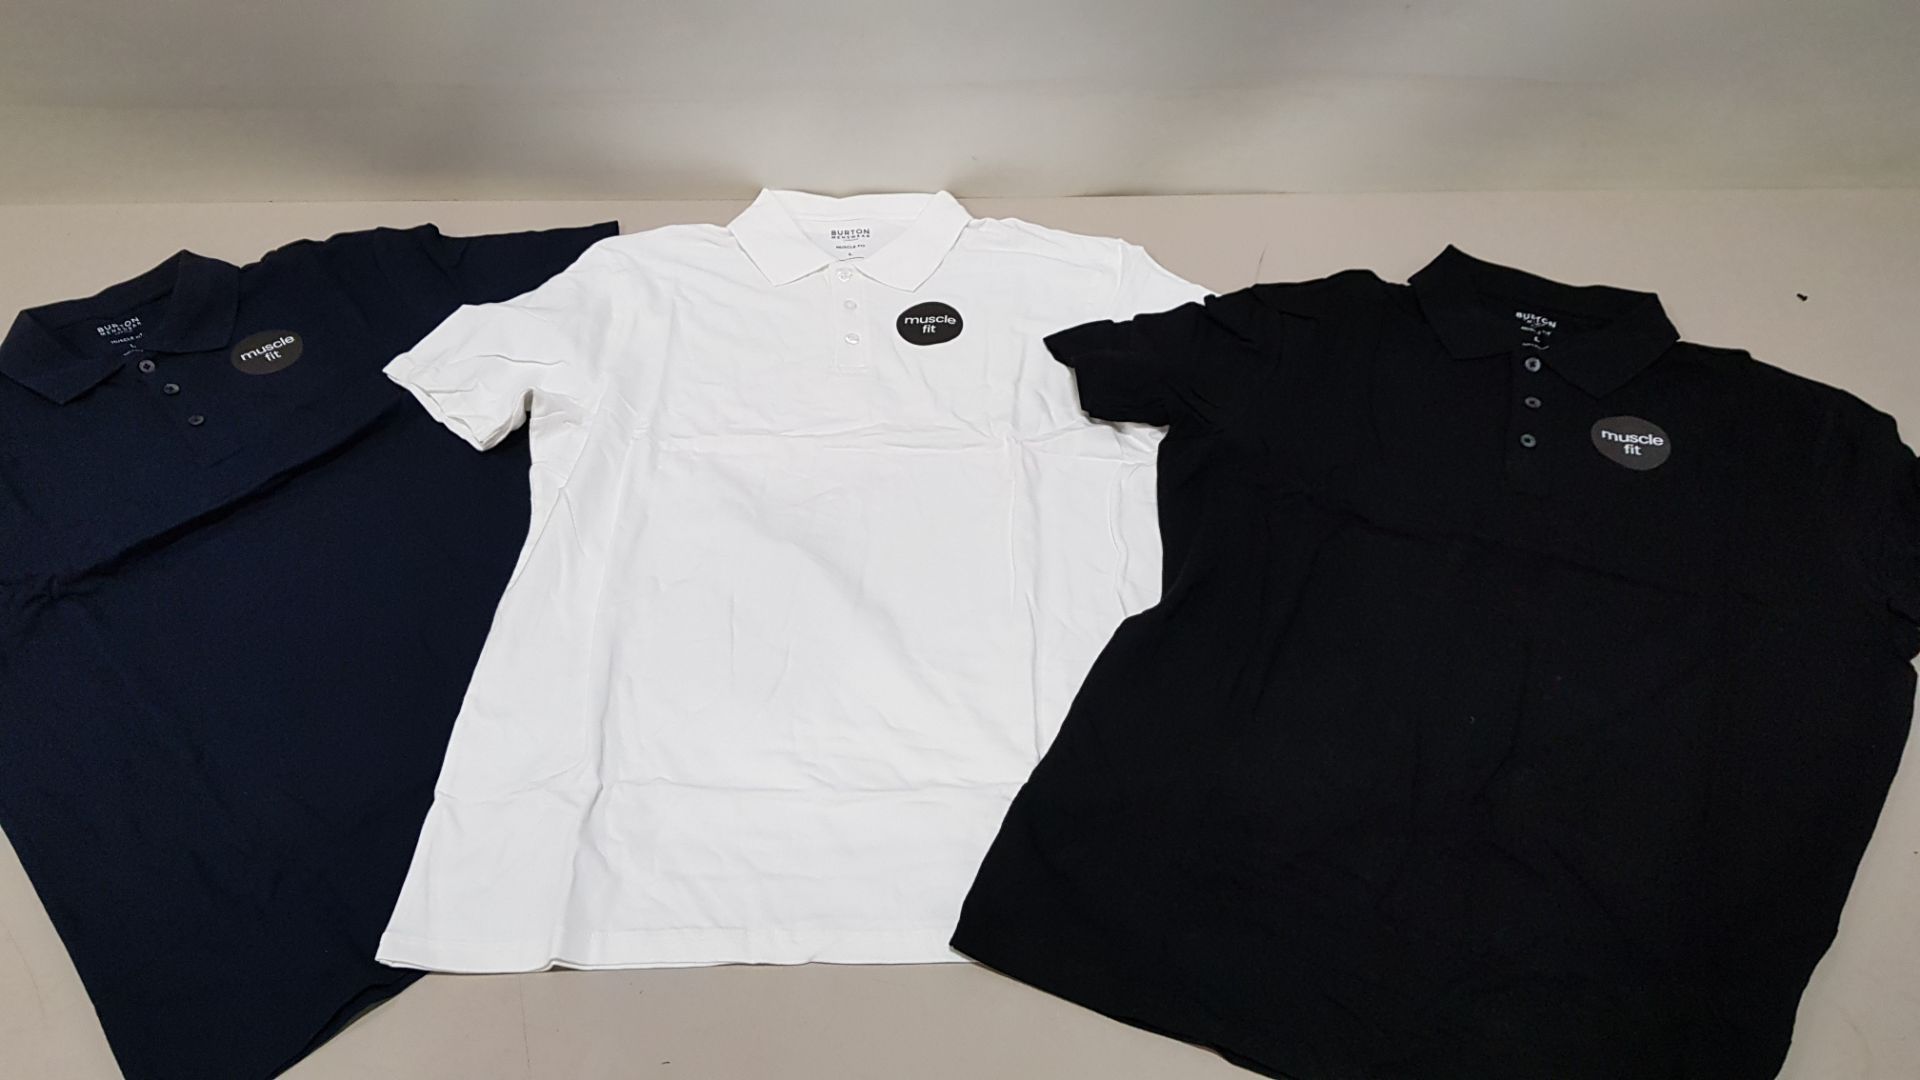 75 X BRAND NEW BURTON MENSWEAR MUSCLE FIT POLO SHIRTS IN NAVY, WHITE AND BLACK SIZE SMALL AND